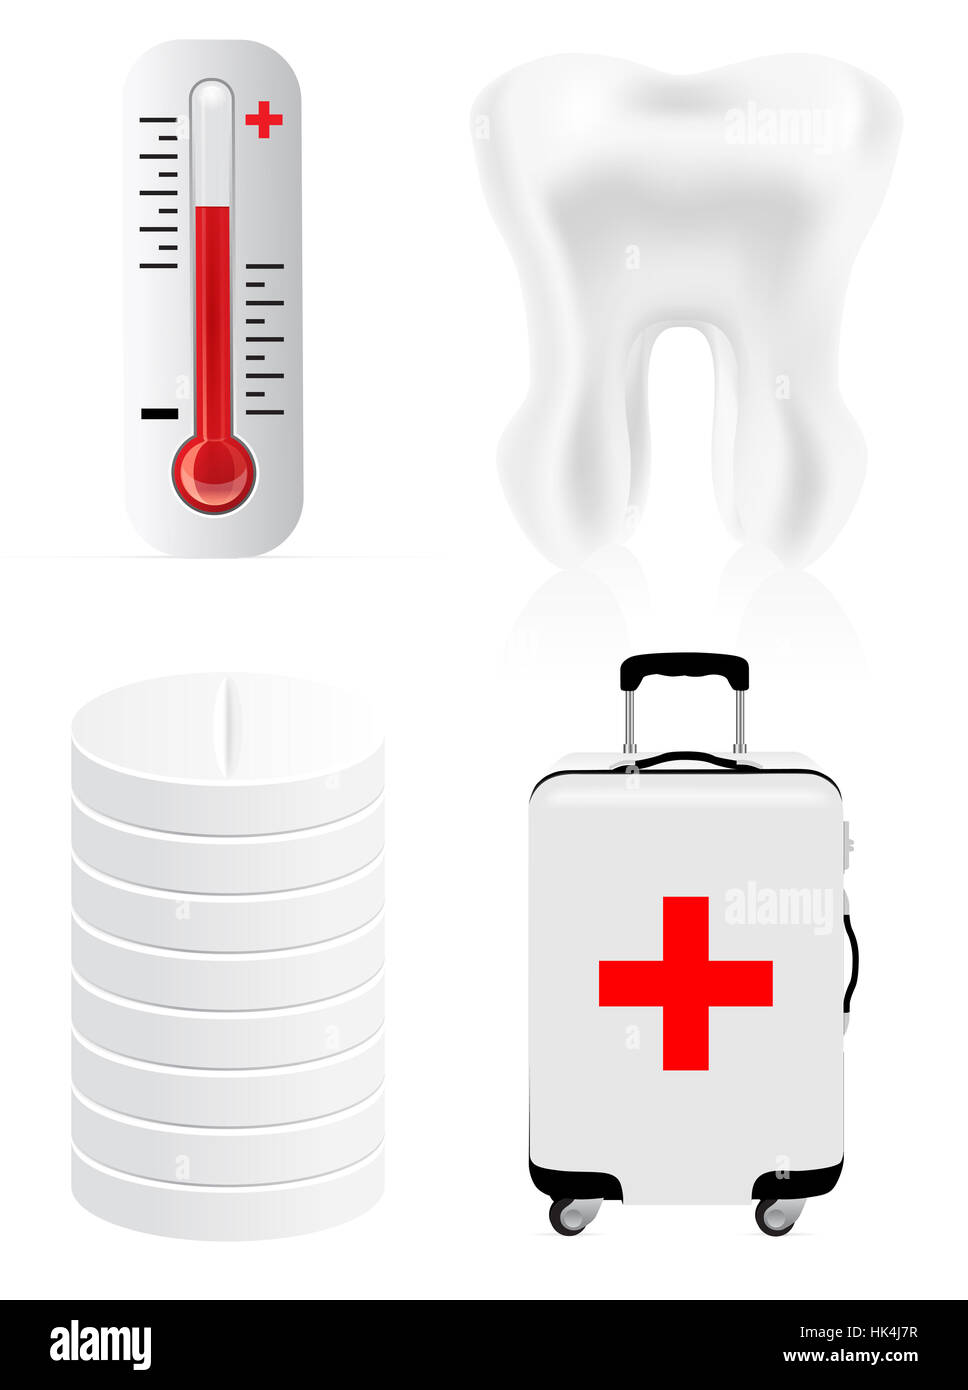 emergency, box, boxes, case, first, ambulance, grey, gray, aid, bag, tools, Stock Photo